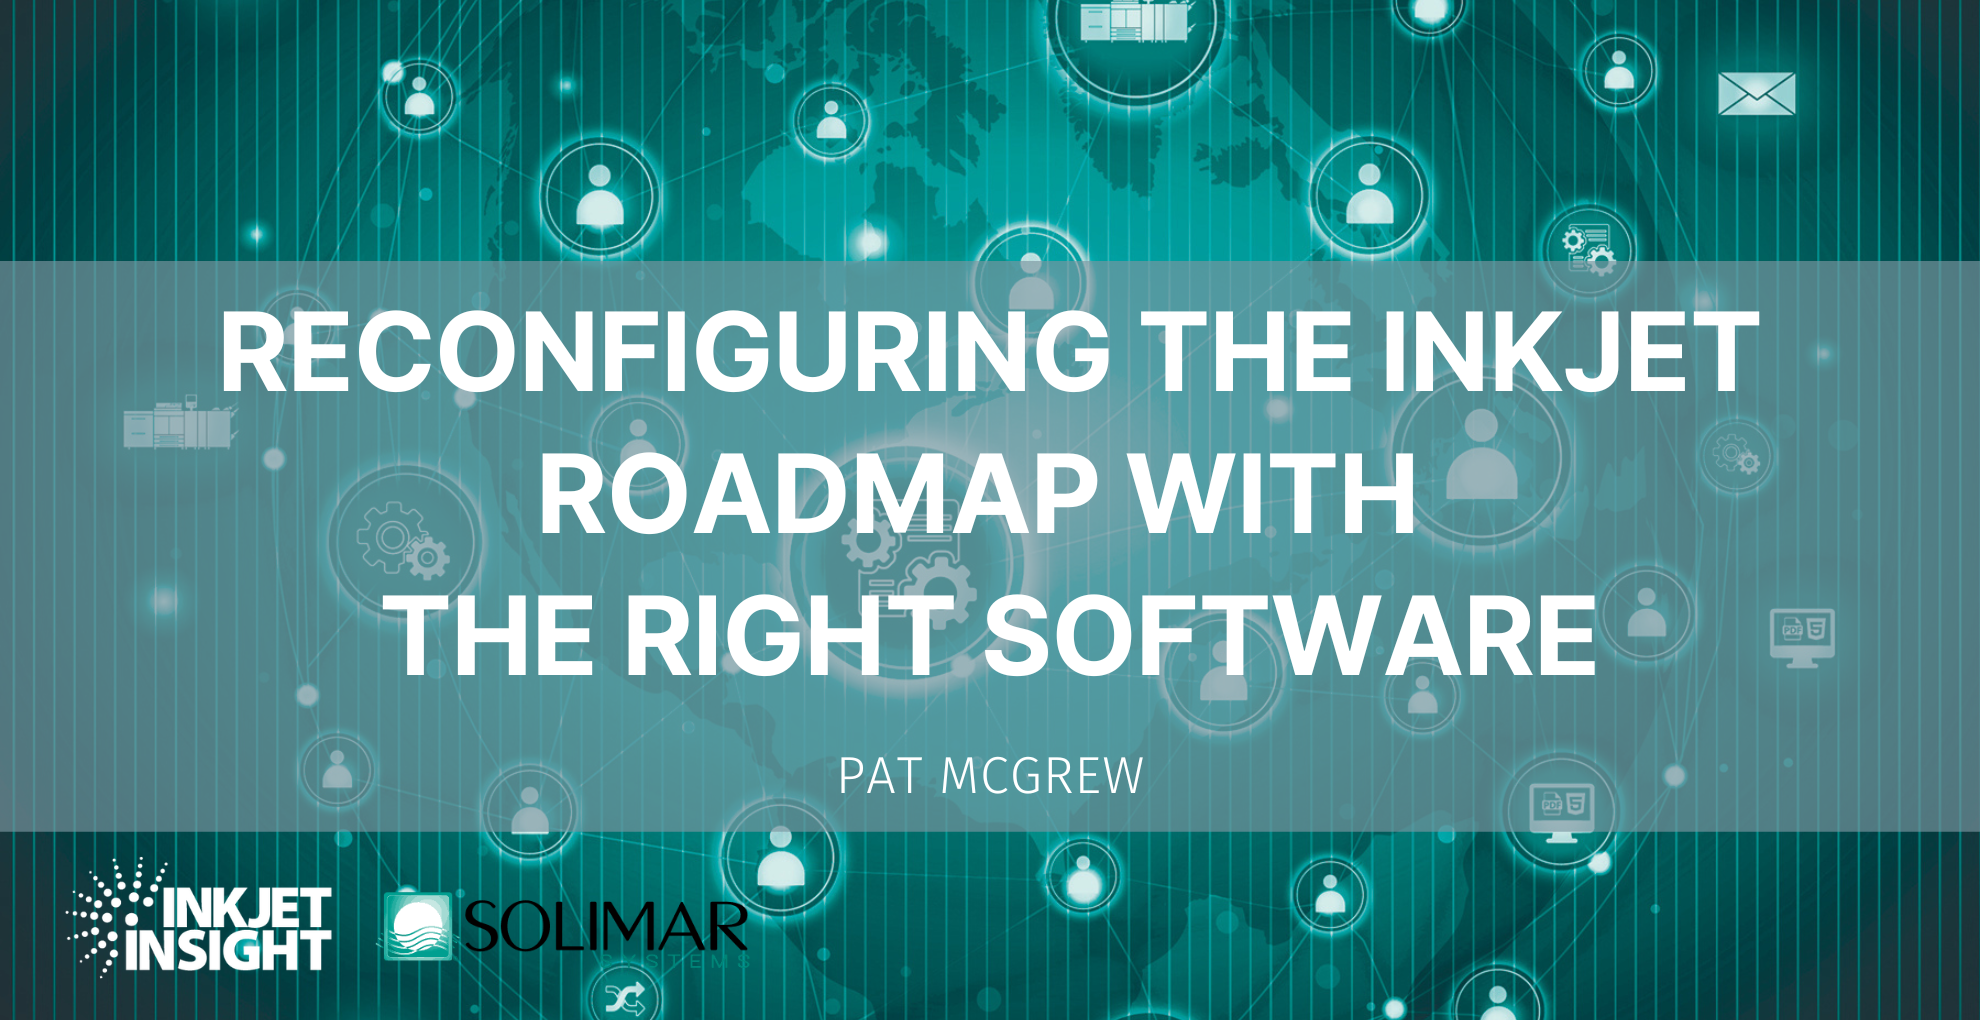 Featured image for “Reconfiguring the Inkjet Roadmap with the Right Software”